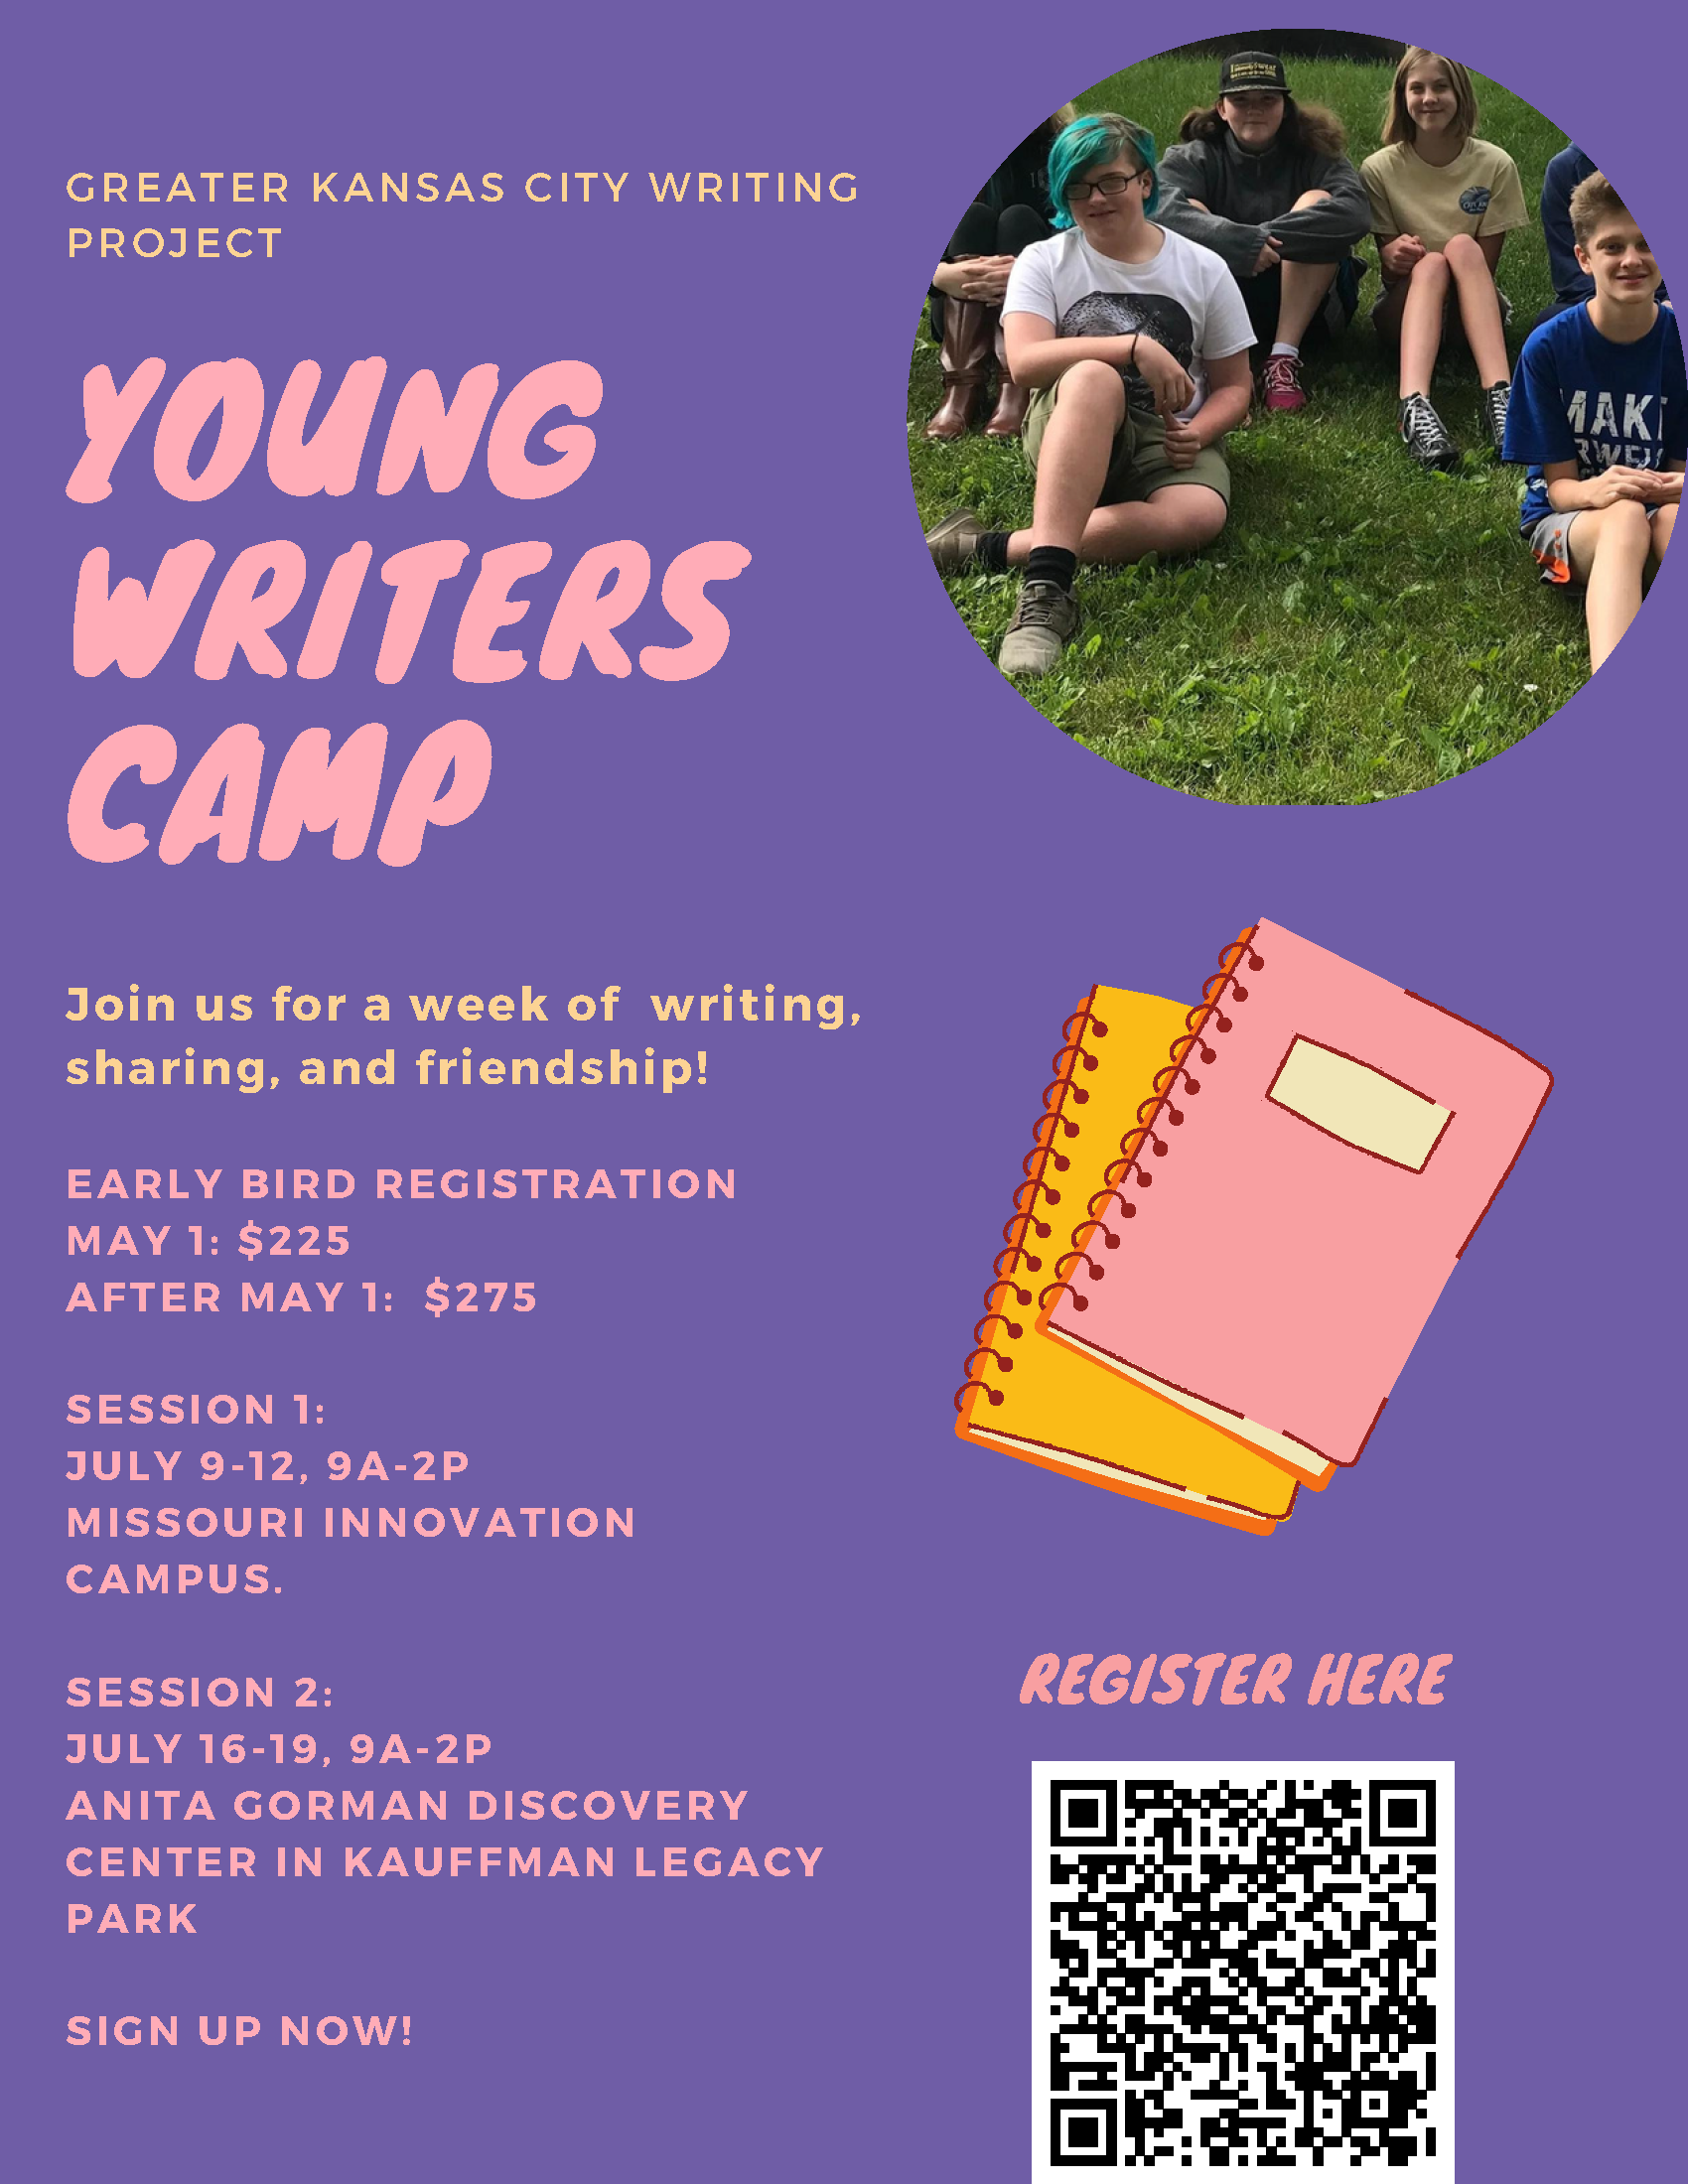 GKCWP Summer Writing Camps